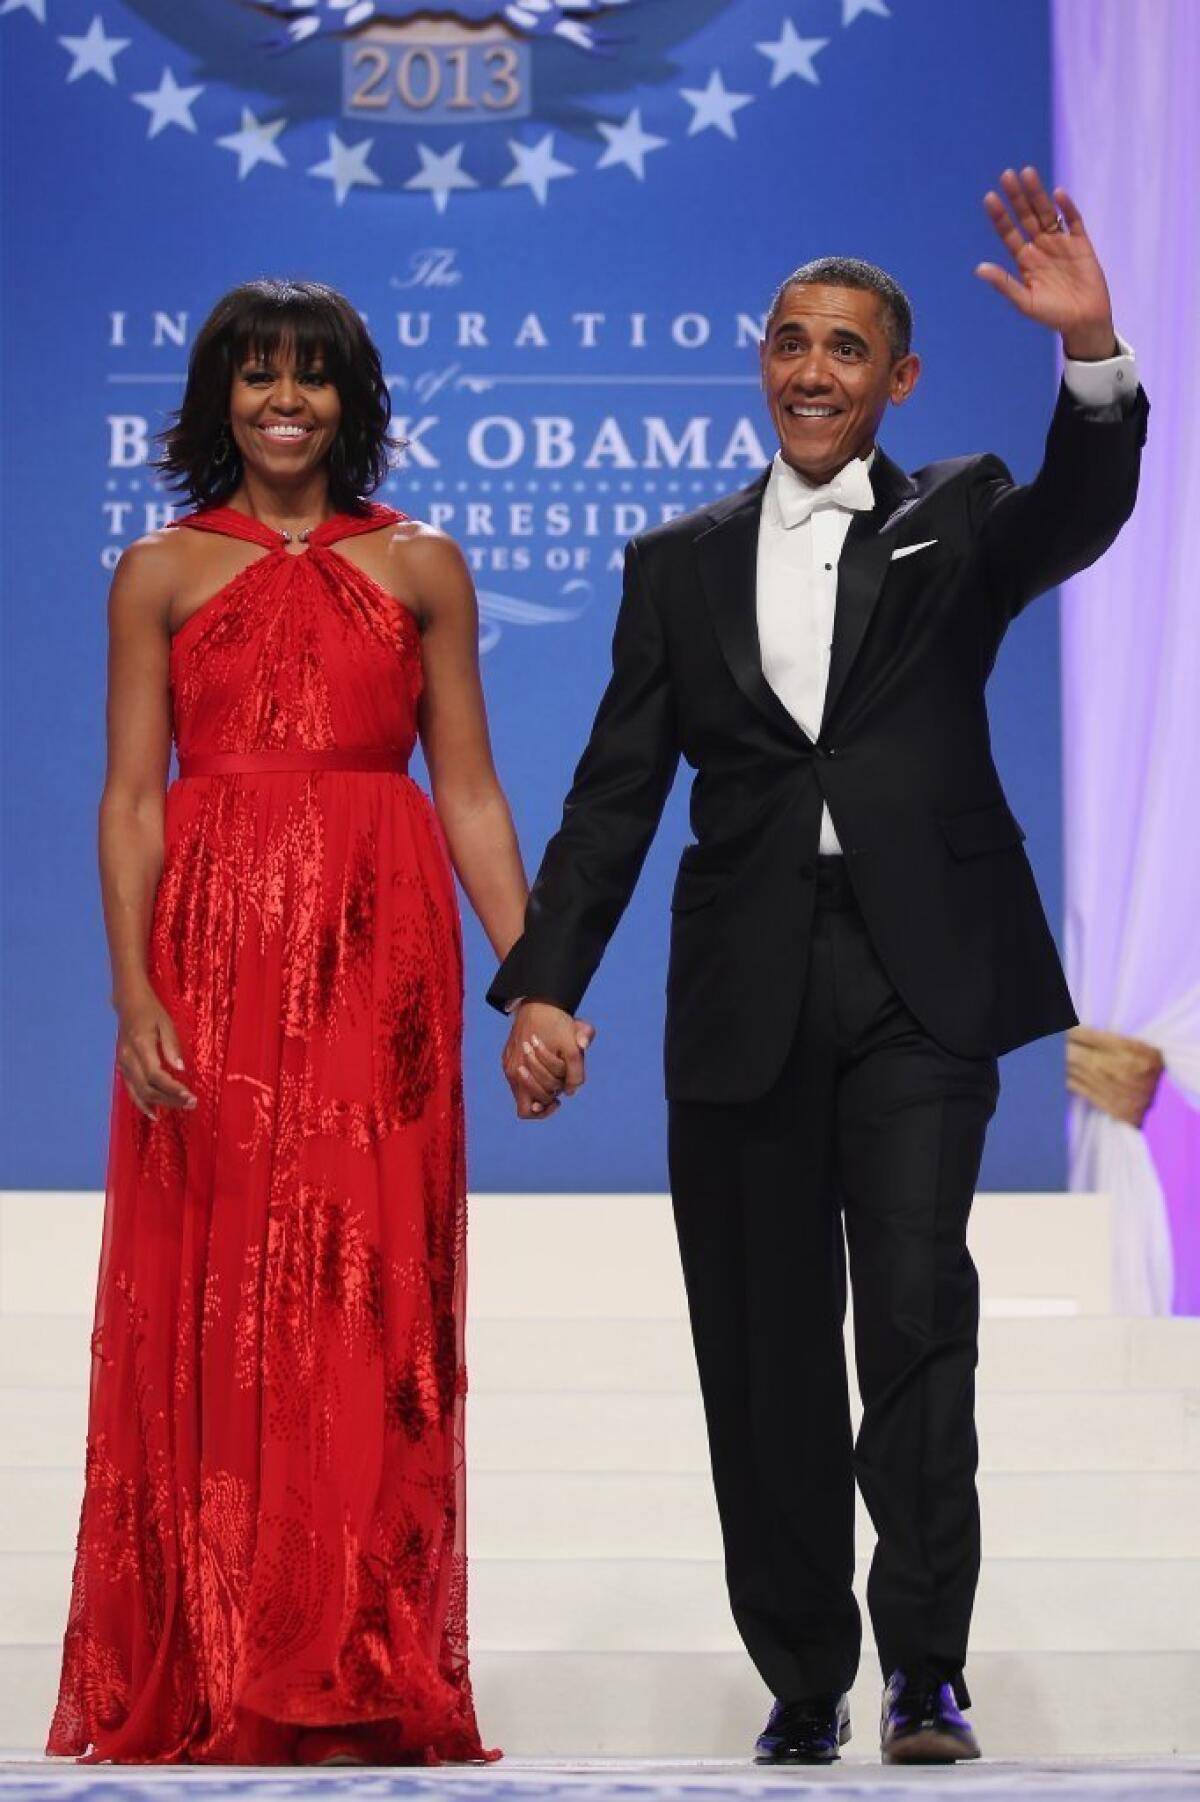 Michelle Obama wears a Jason Wu gown as she and President Obama arrive at the Commander-in-Chief's Inaugural Ball on Monday.